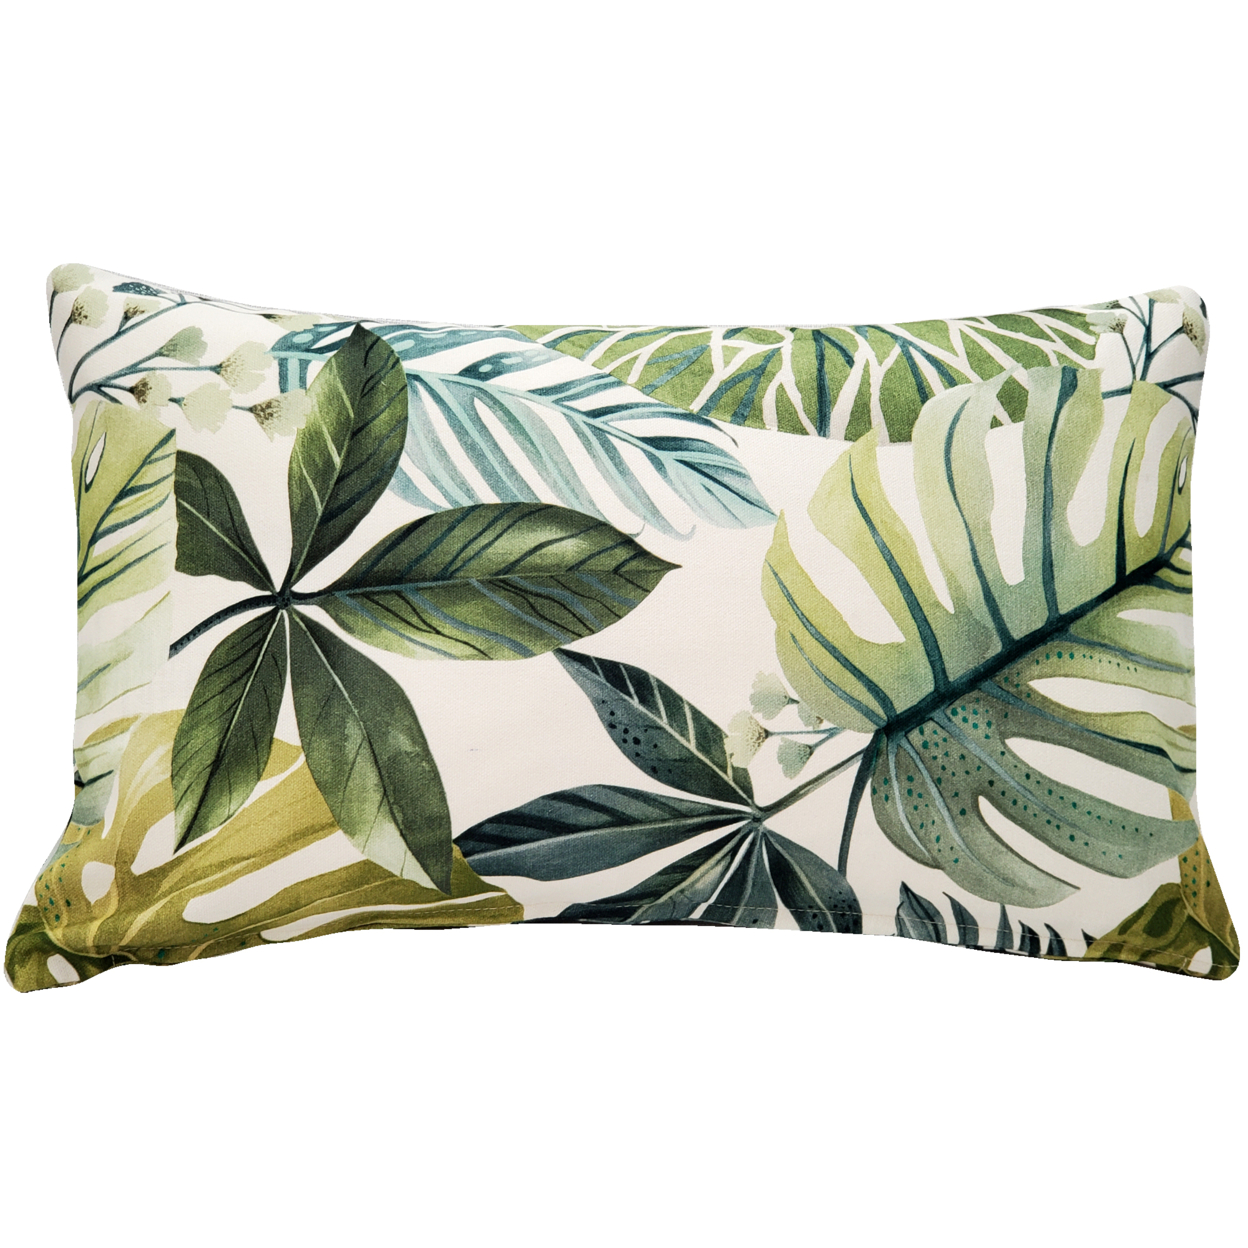 Thai Garden Green Leaf Throw Pillow 12x20 Inches Square, Complete Pillow With Polyfill Pillow Insert